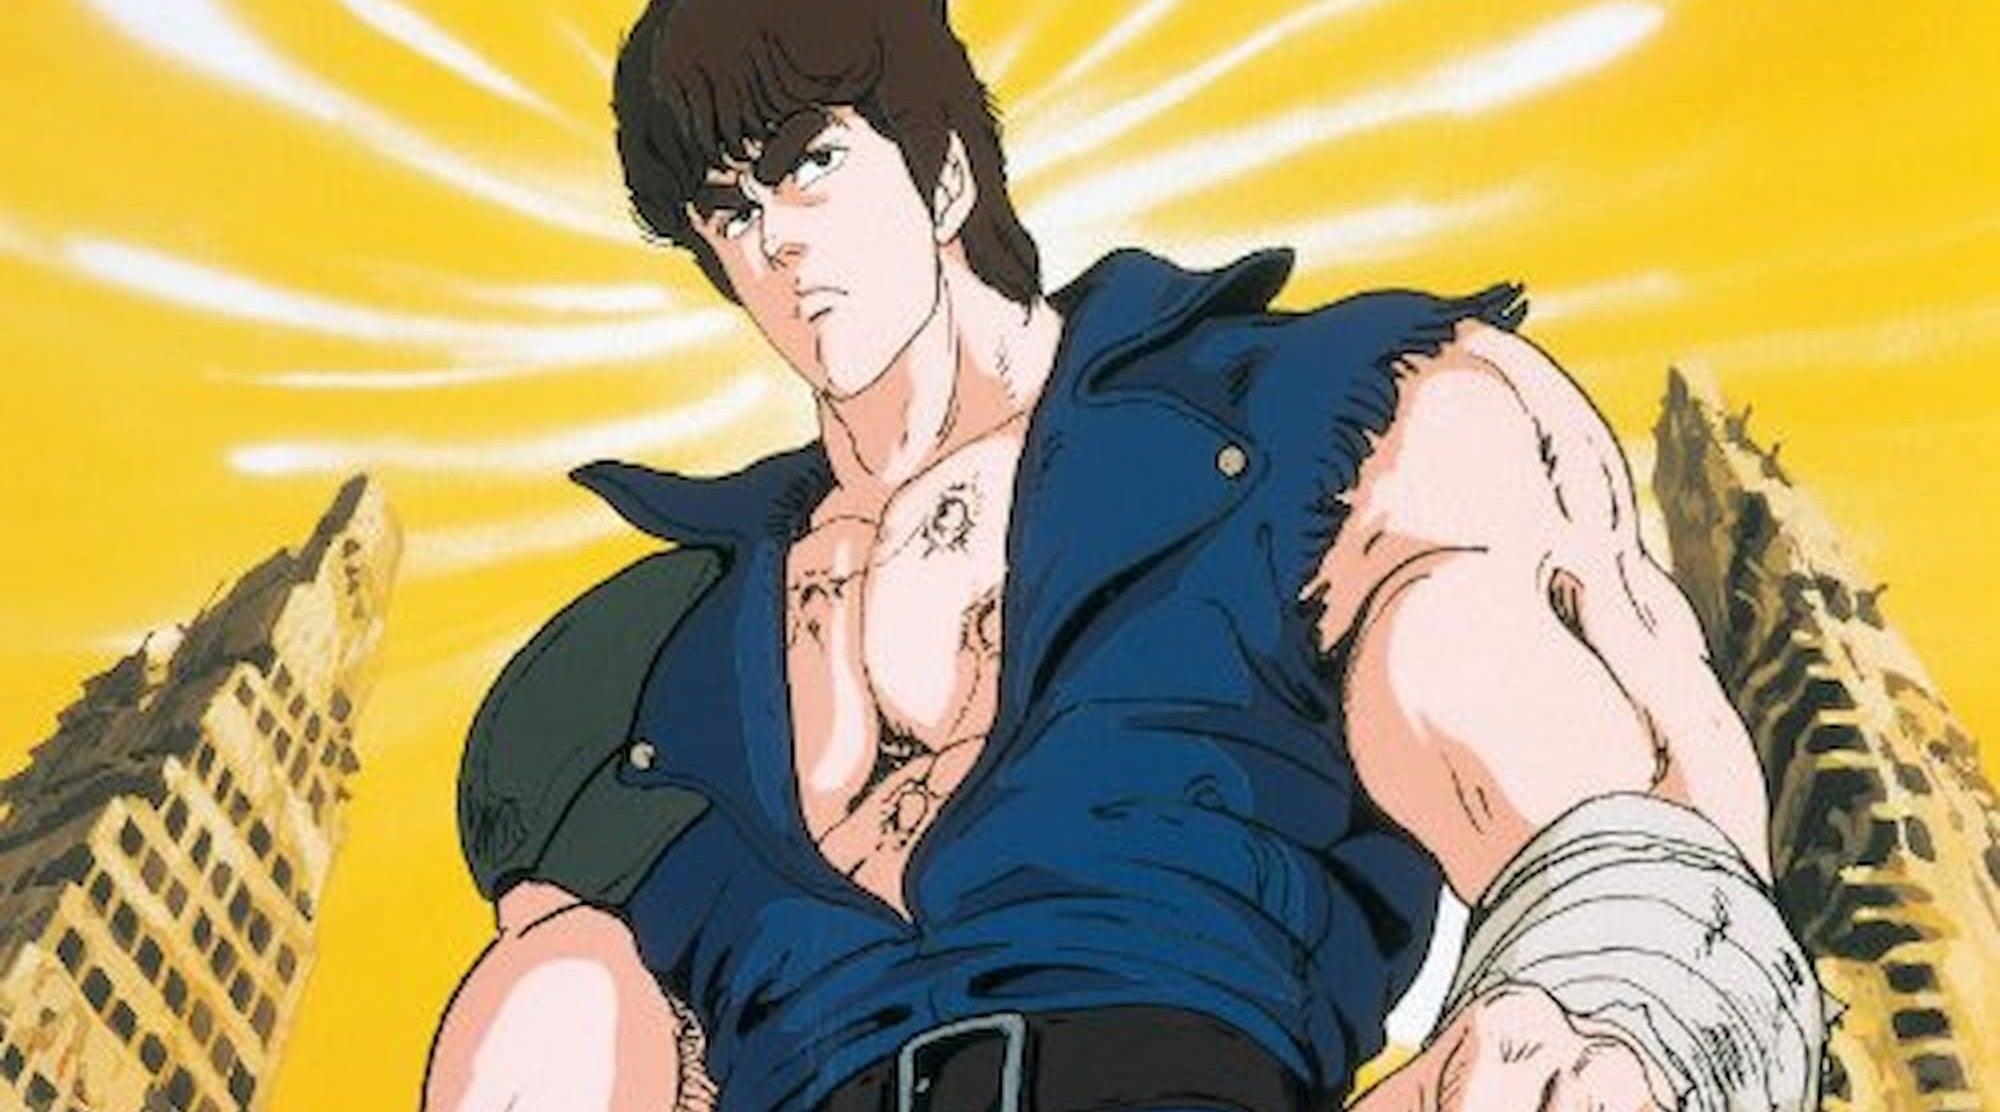 Fist of the North Star: Legend of Kenshiro (movie) - Anime News Network